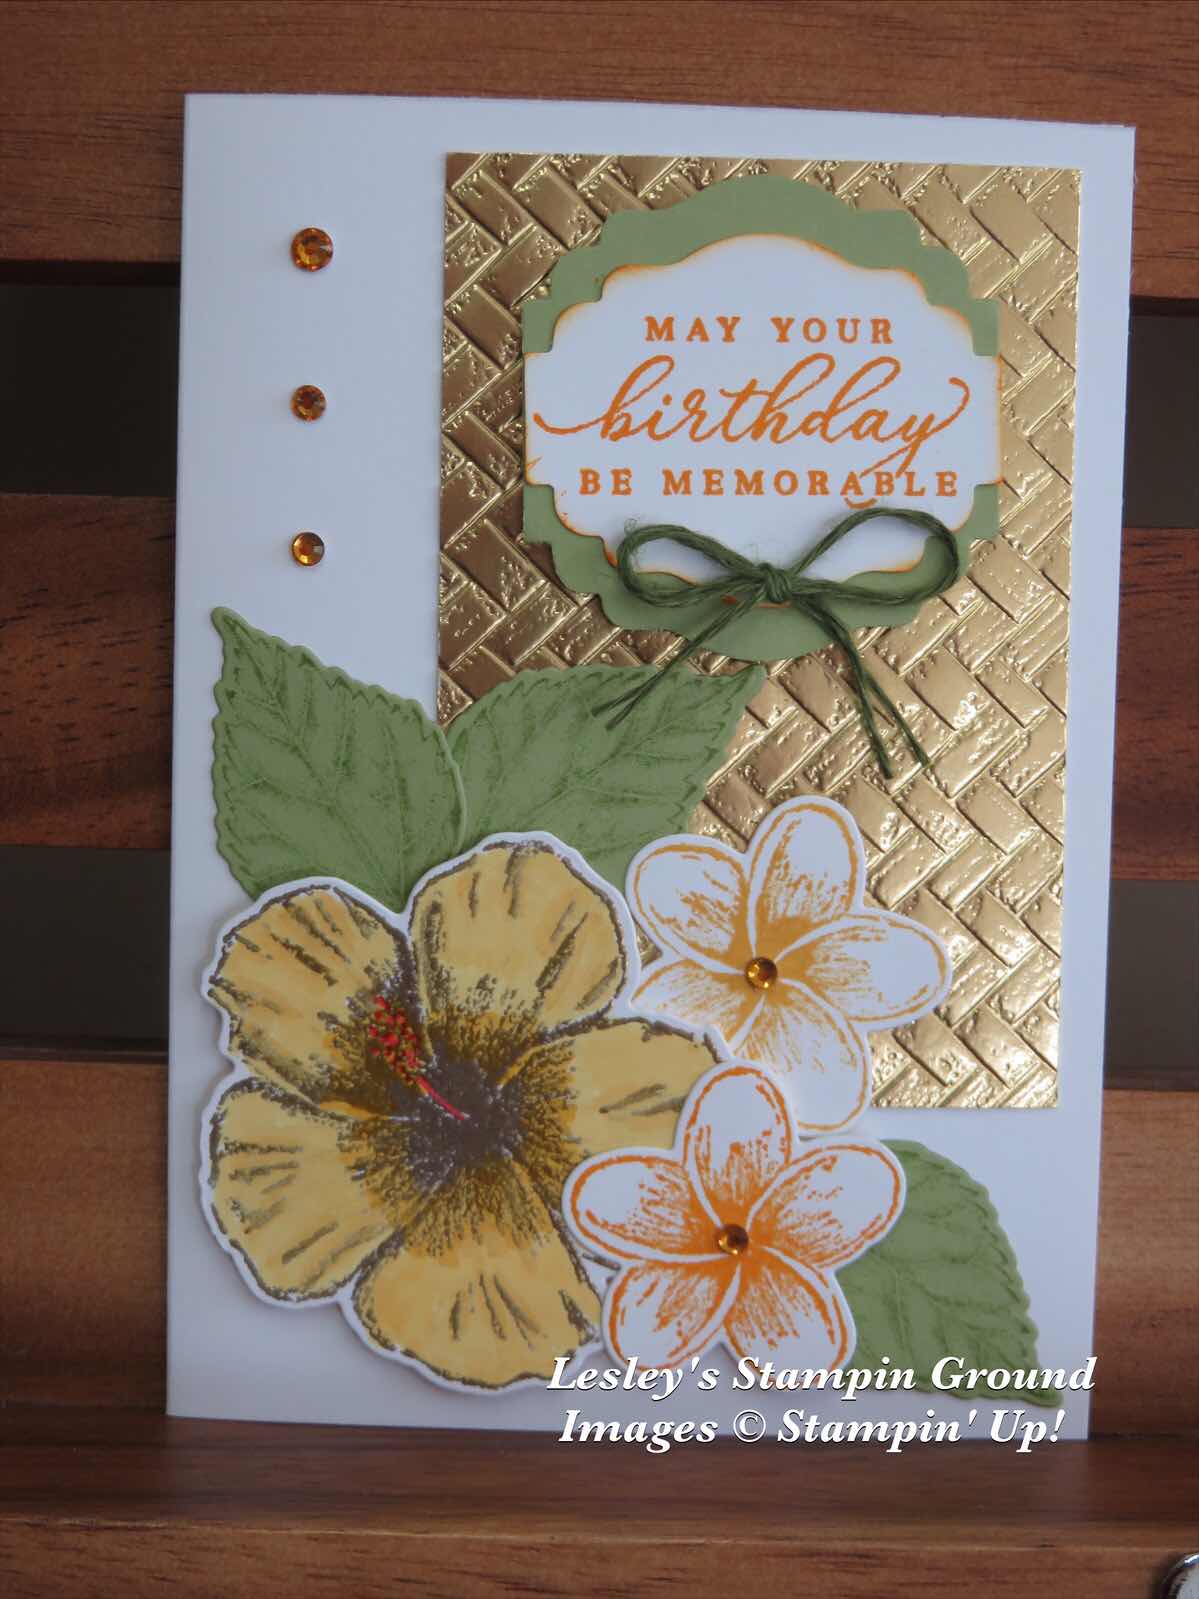 Lesley's Stampin Ground : January 2020